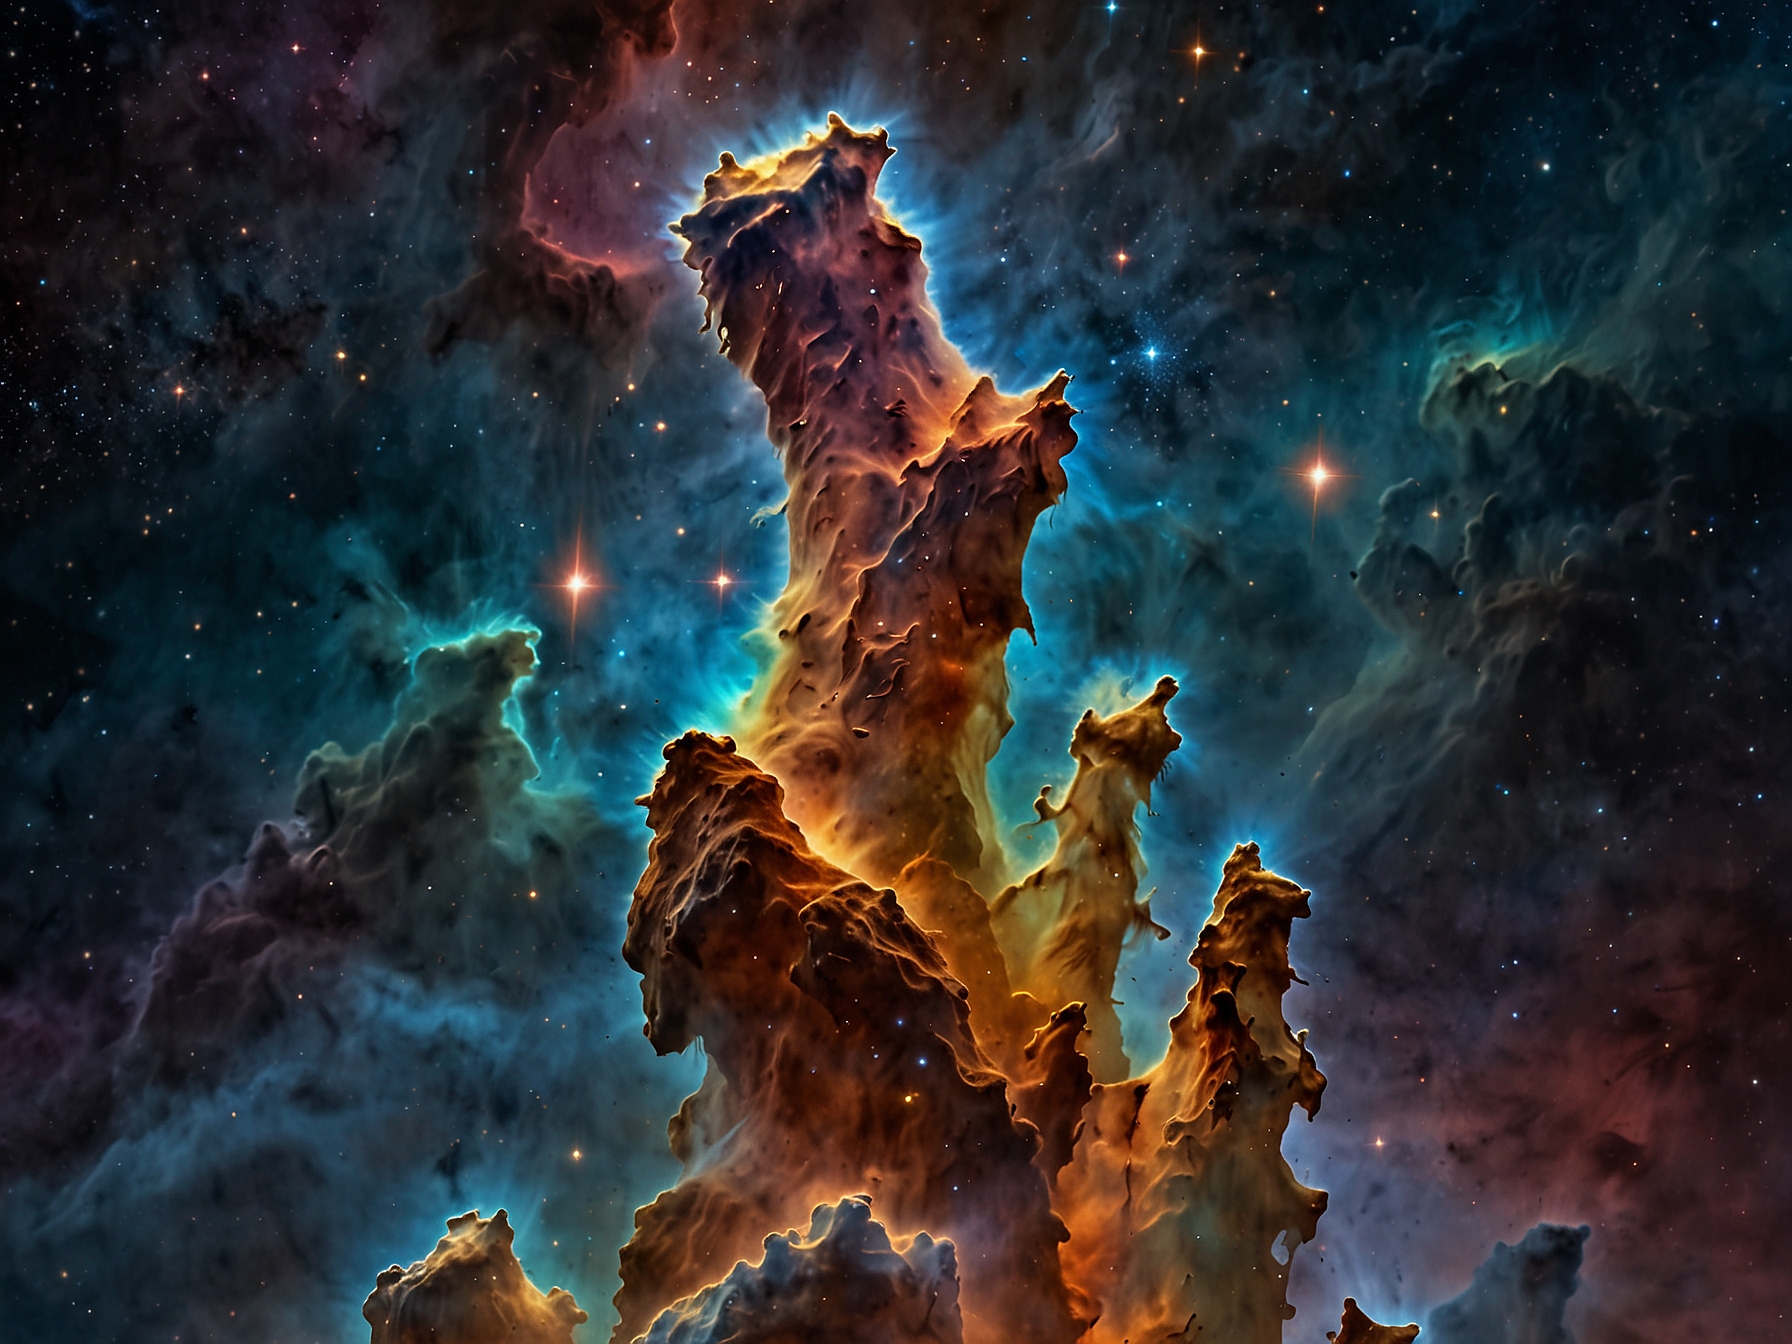 A 3D render of the 'Pillars of Creation' showcasing the towering columns of gas and dust, highlighting the intricate details and textures visible in the nebula through cutting-edge technology.